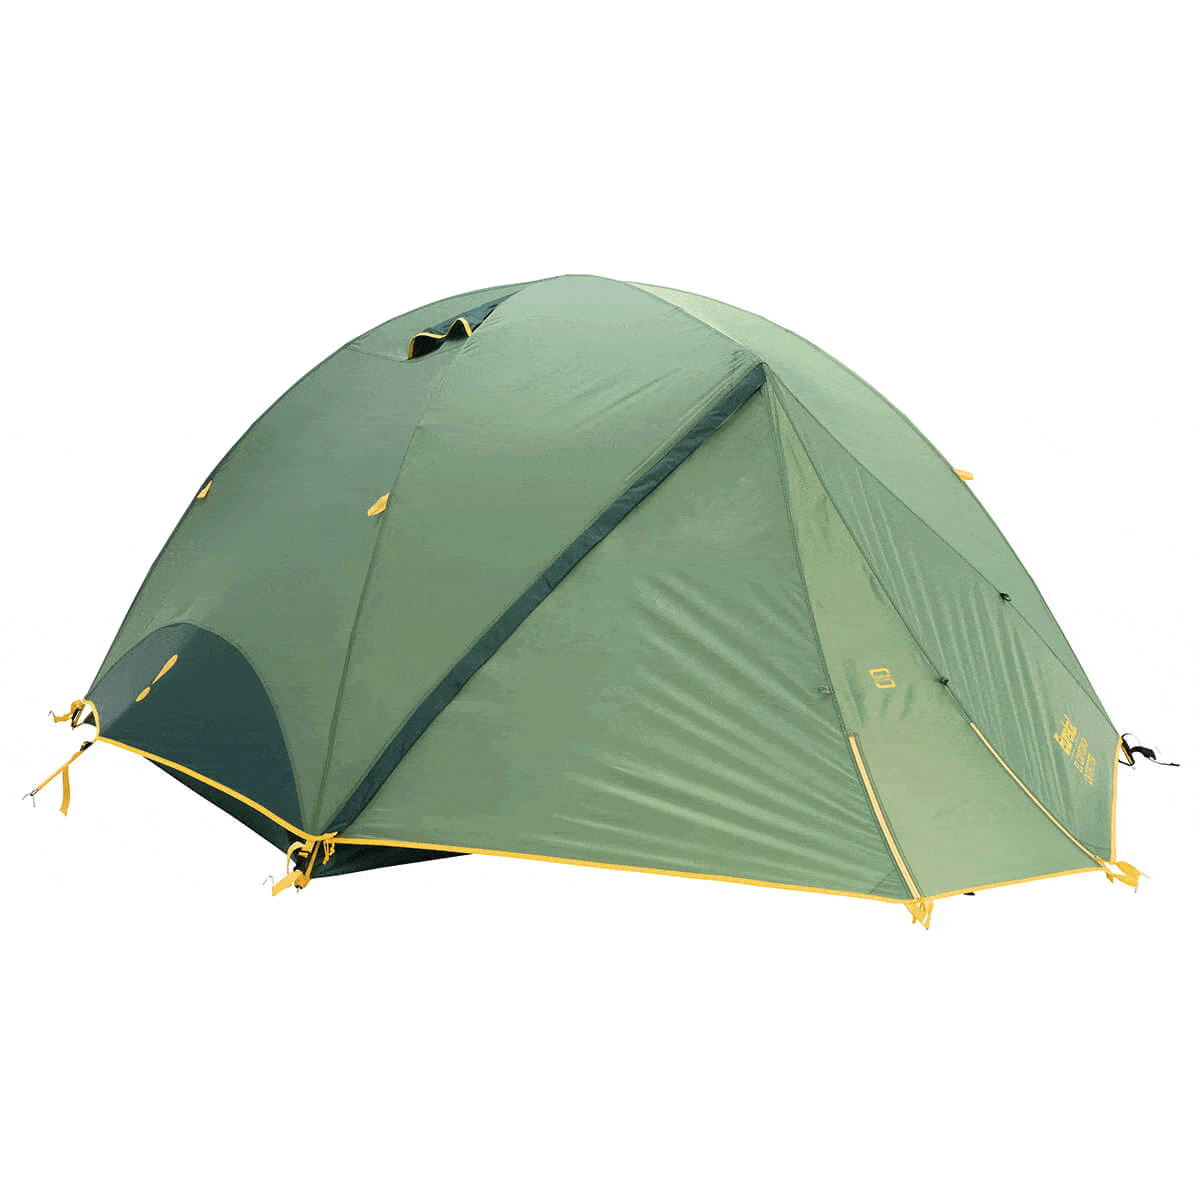 Eureka! El Capitan 3+ Outfitter Tent with rainfly on